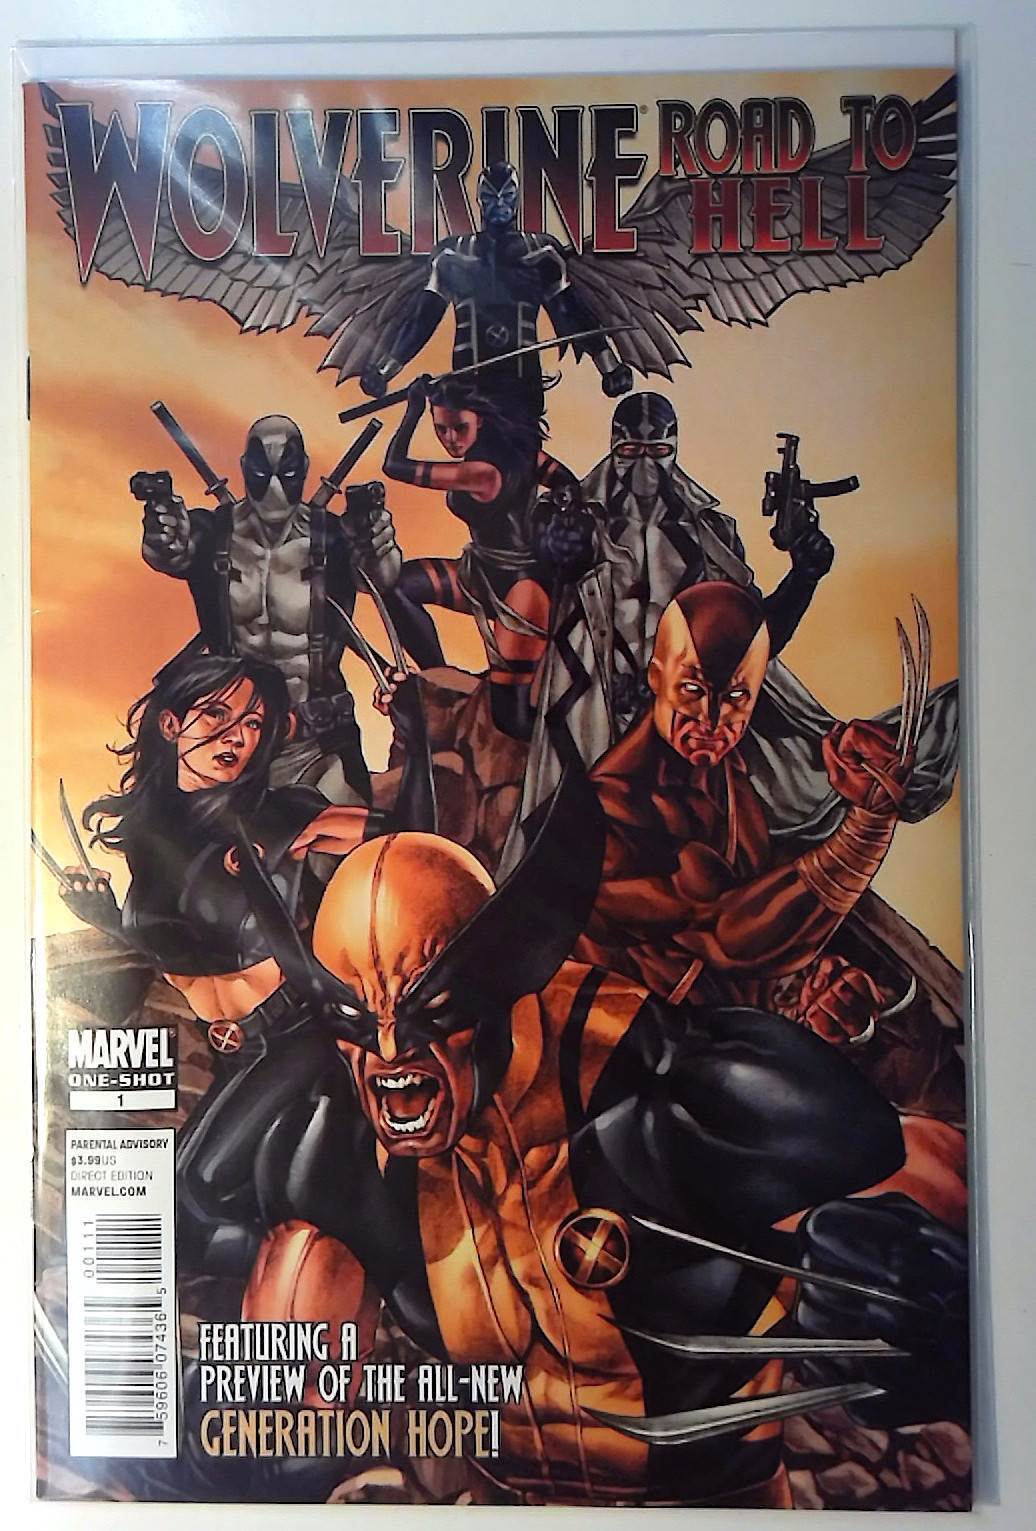 Wolverine: The Road to Hell #1 Marvel (2010) NM One-Shot 1st Print Comic Book